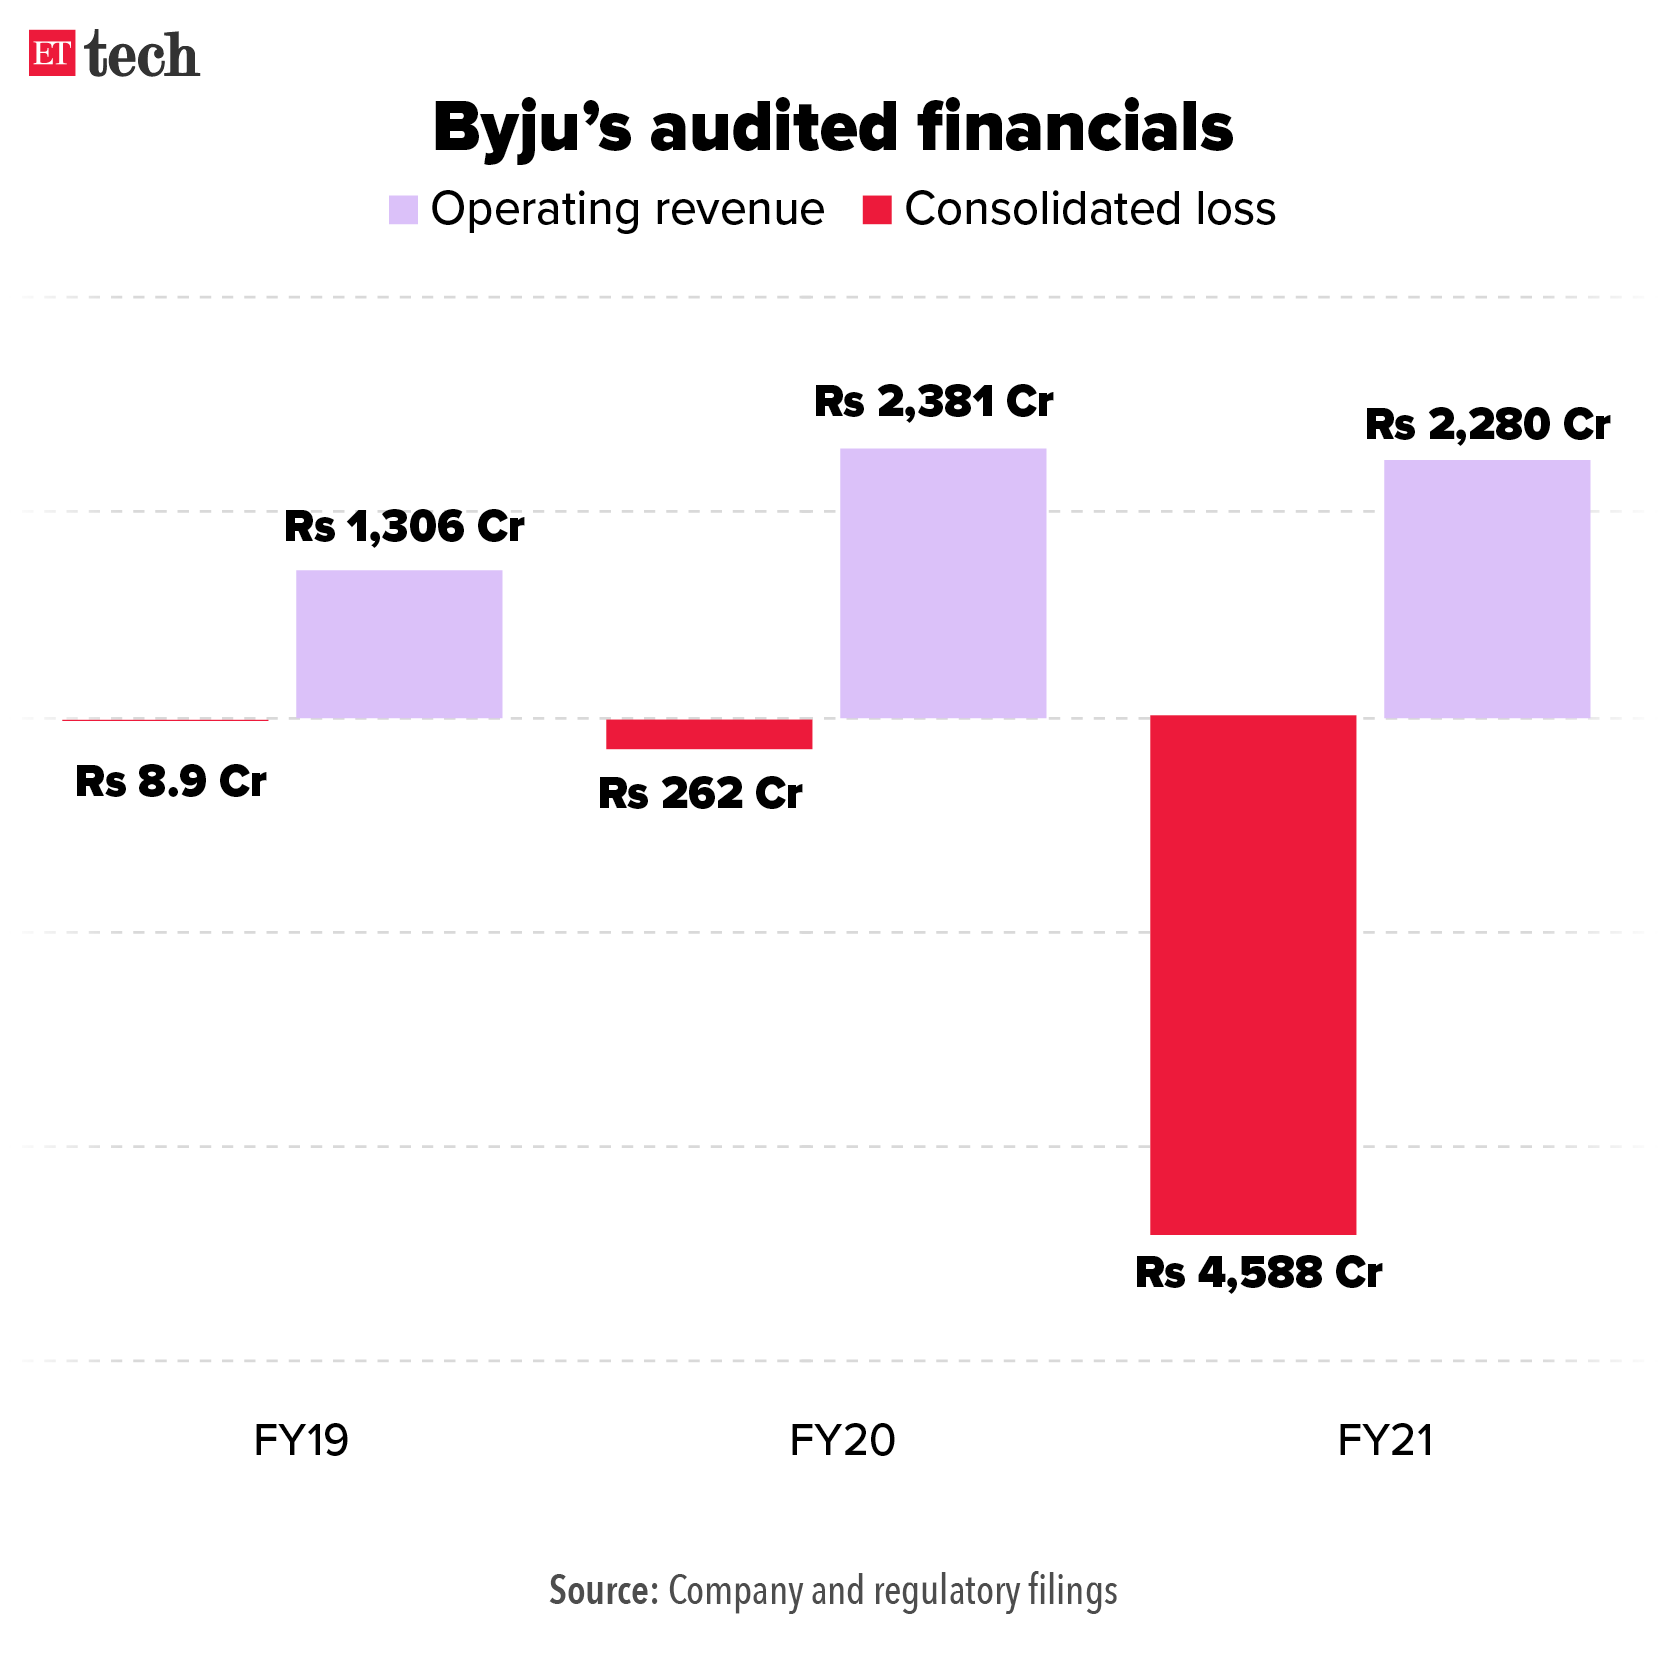 Byjus audited financials_FY21_Graphic_ETTECH